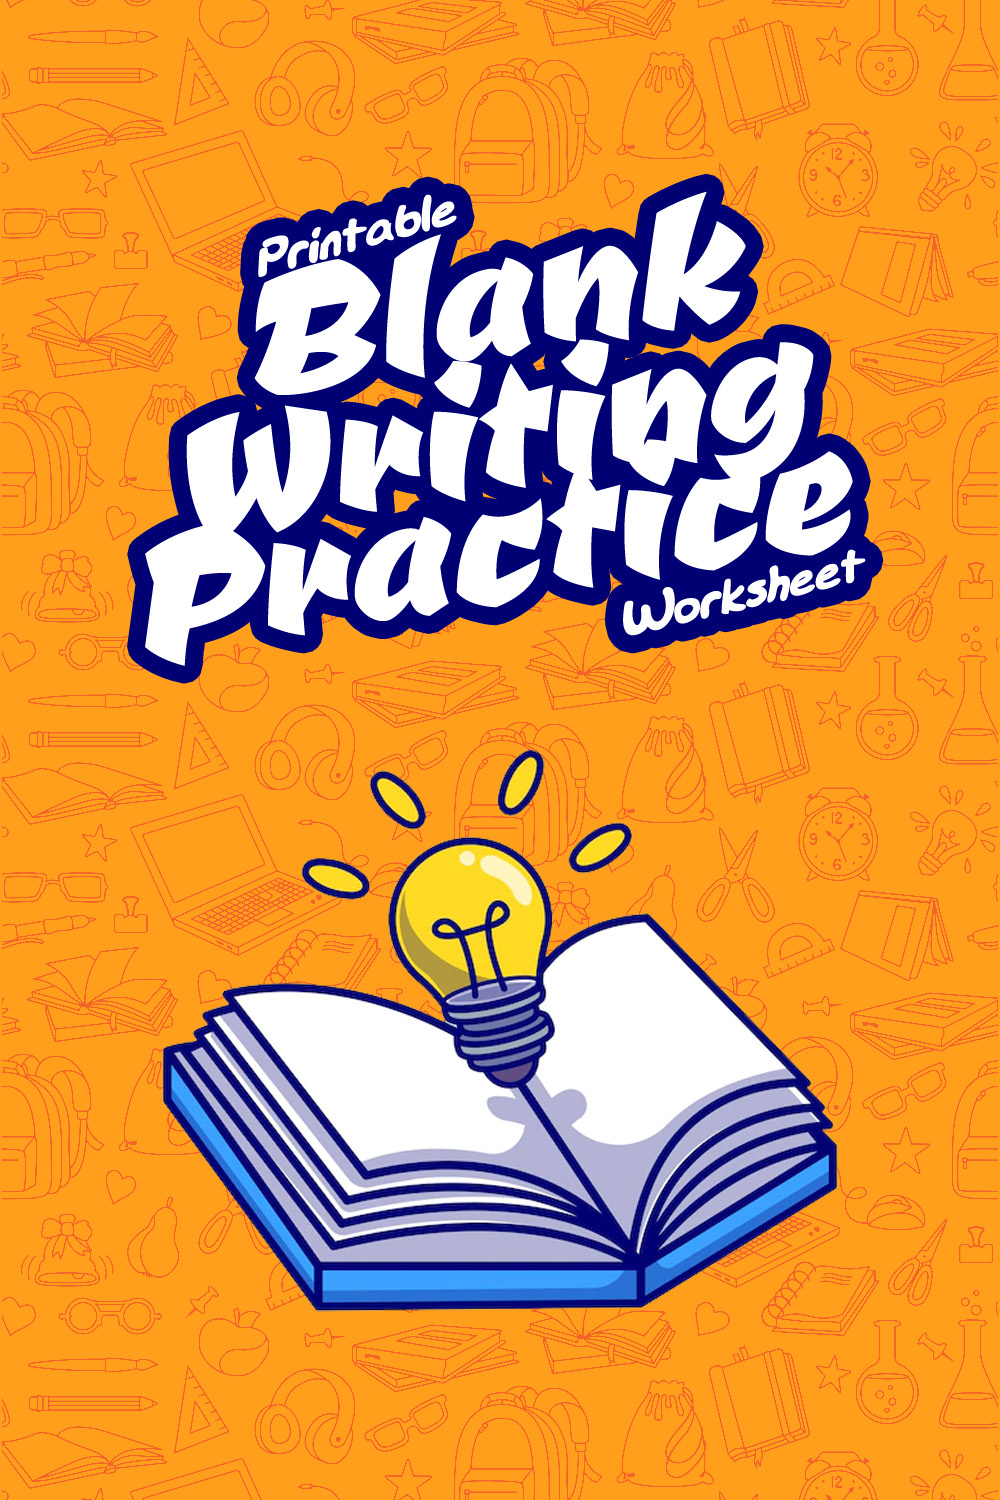 15 Images of Printable Blank Writing Practice Worksheets